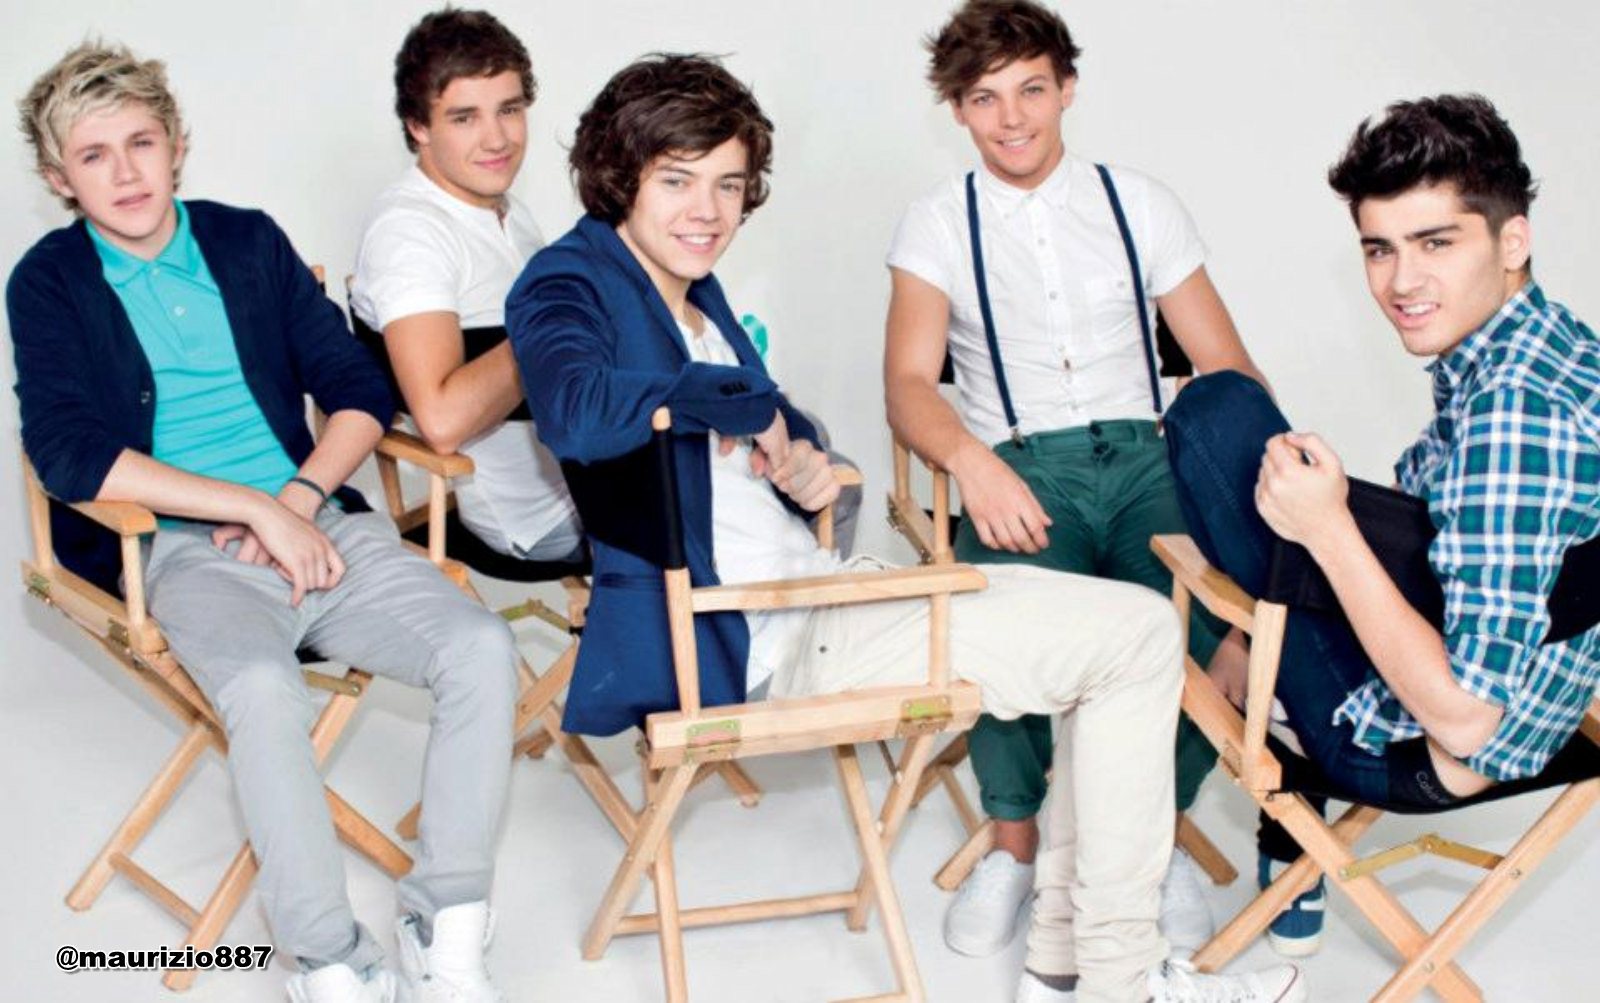 wallpapers one direction hd 3 one direction 2013 hd wallpaper 2 one